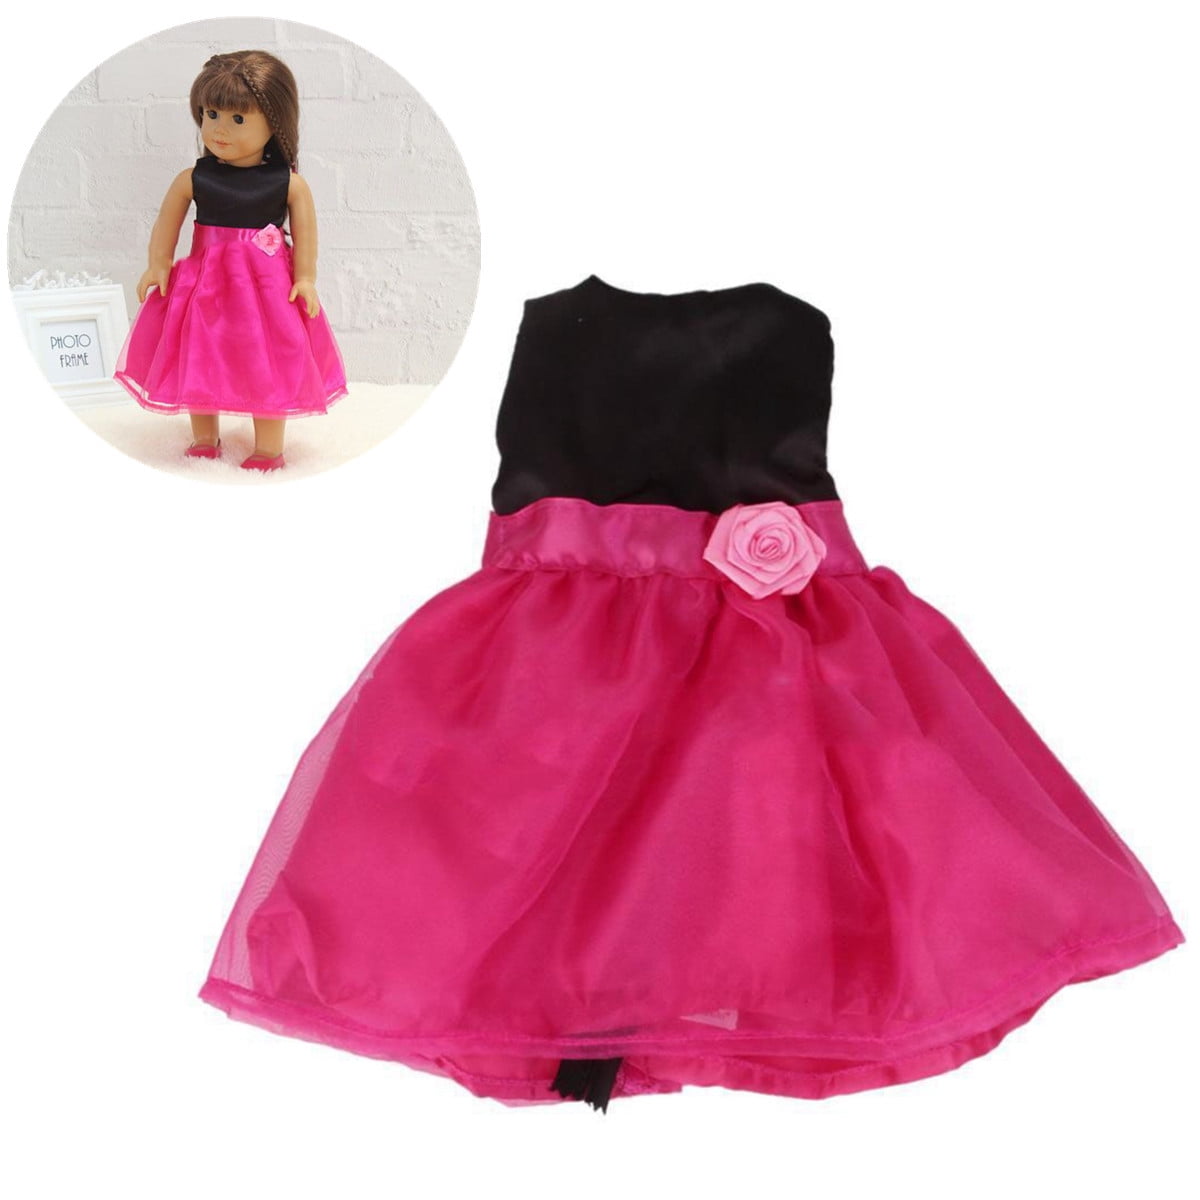 18 inch girl fashion princess dress doll clothes for american doll girl 